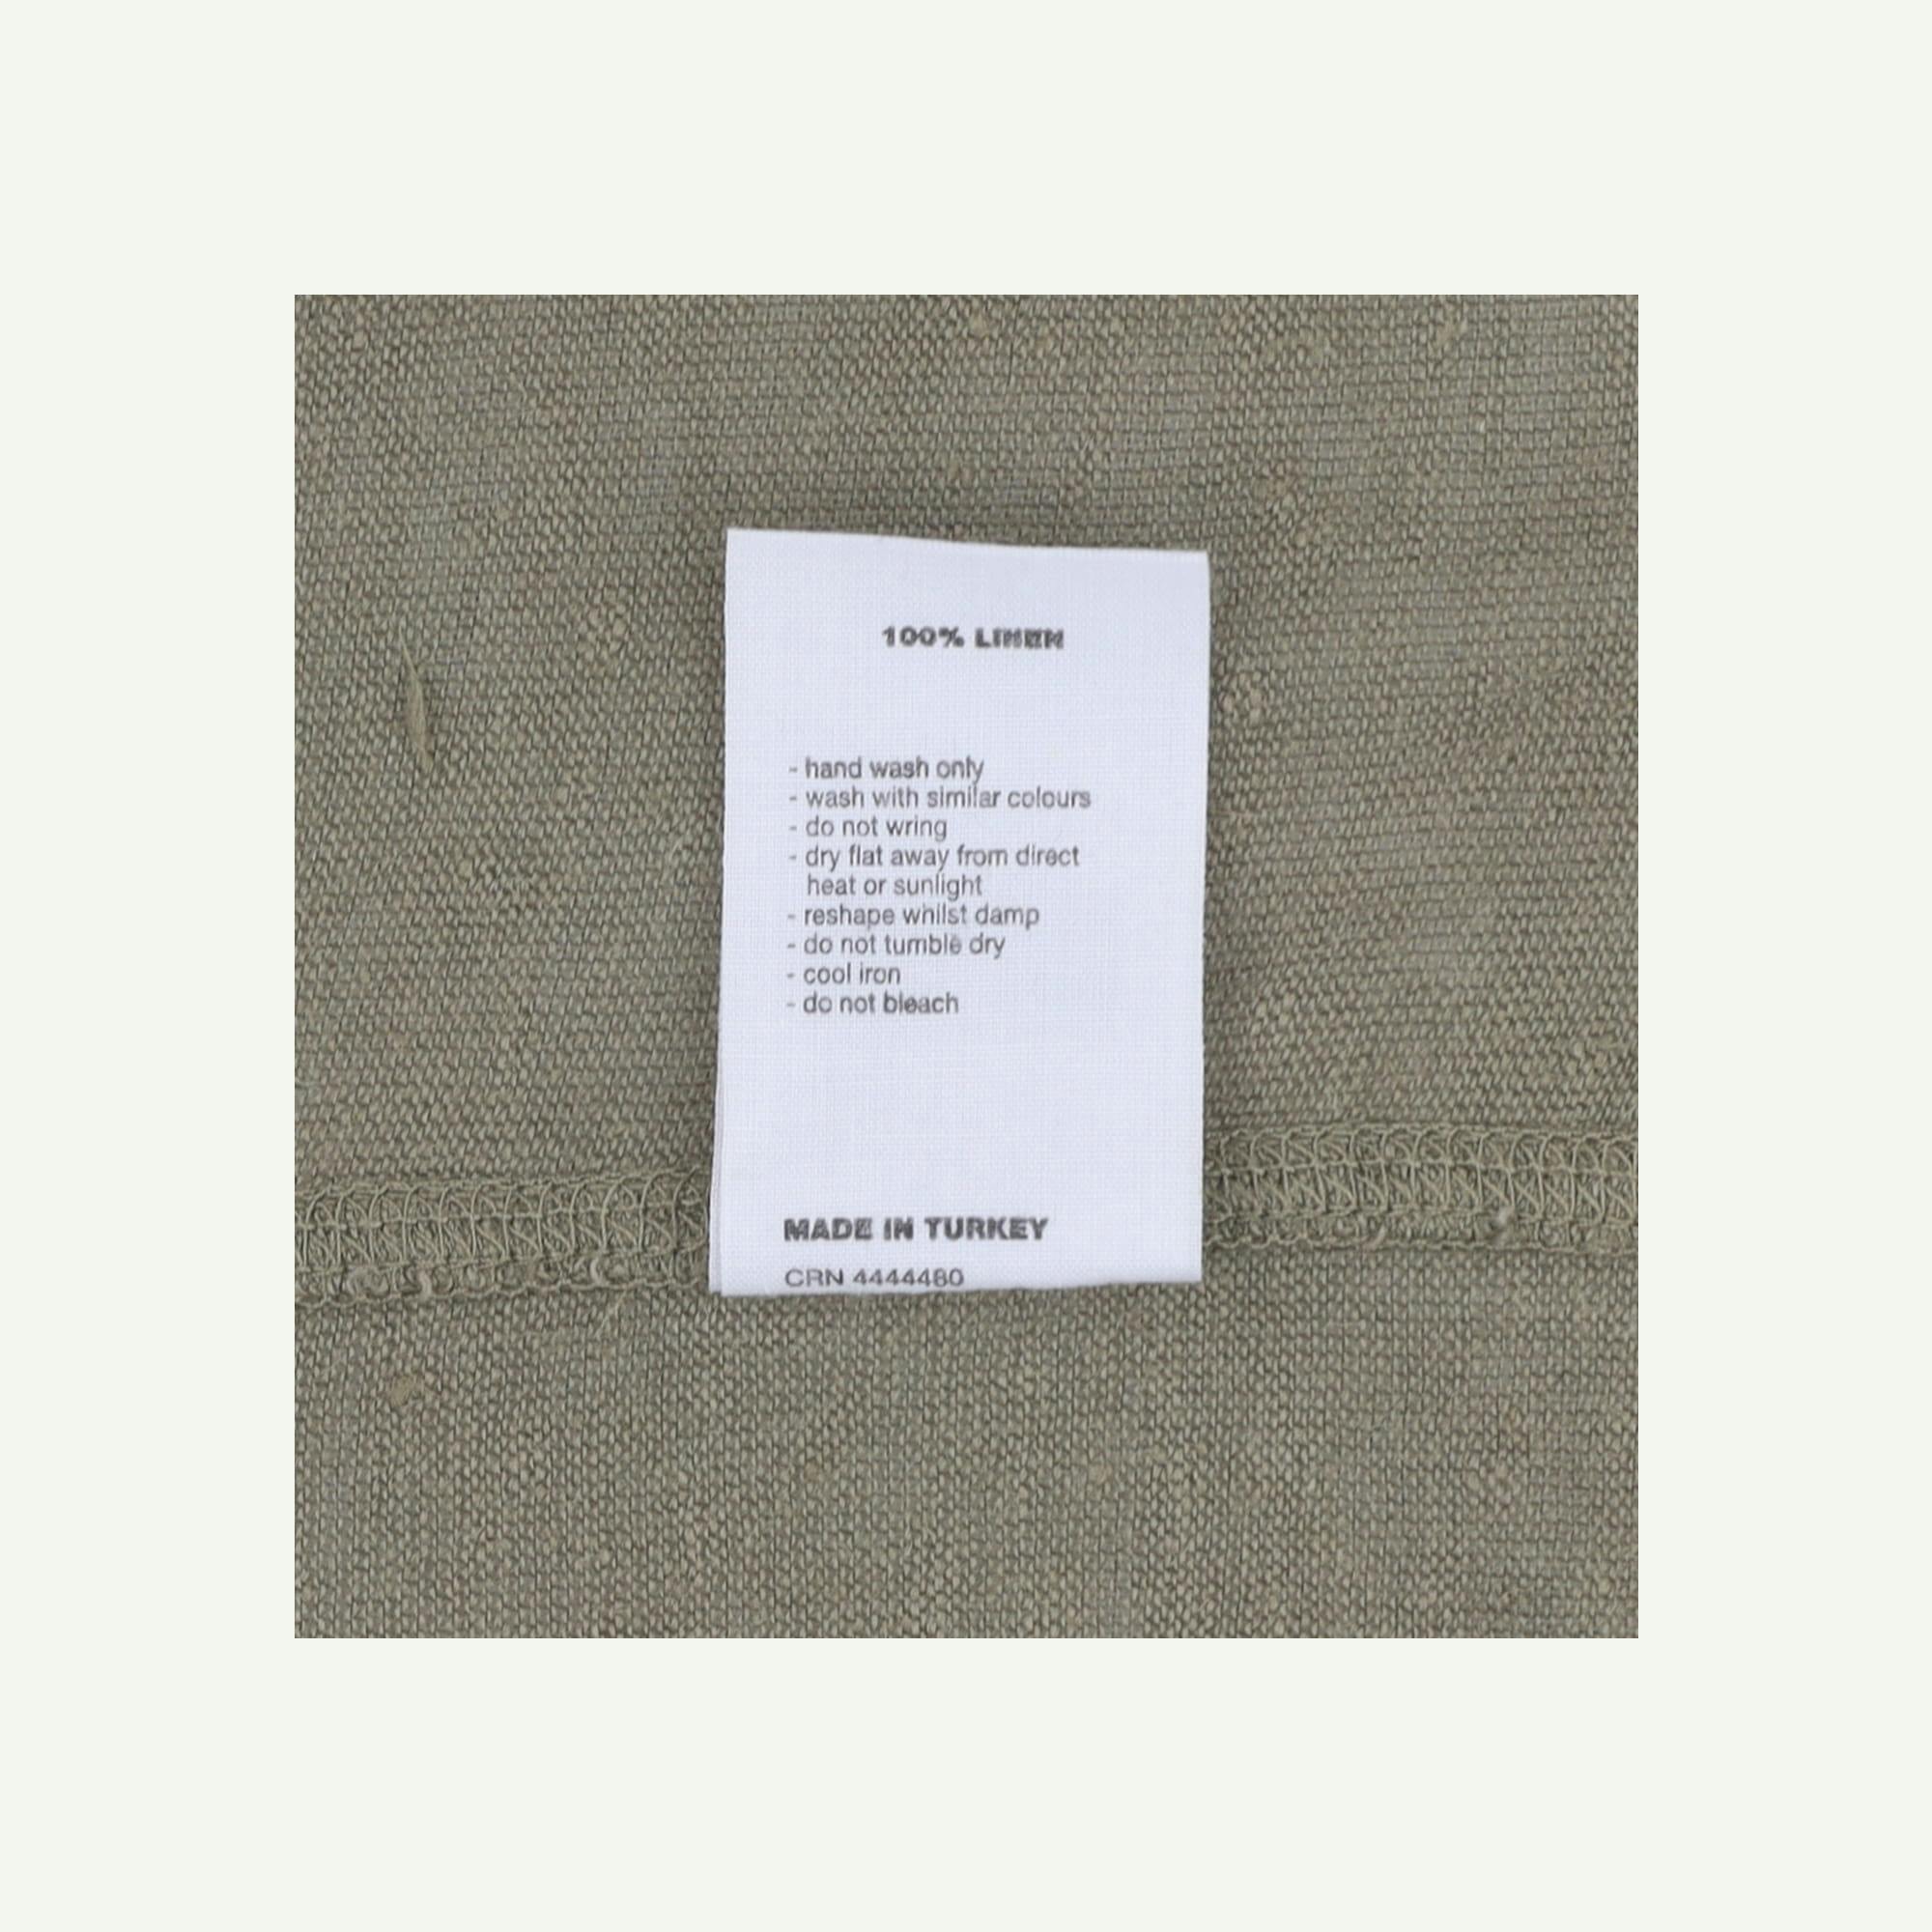 Finisterre Repaired Green T-shirt